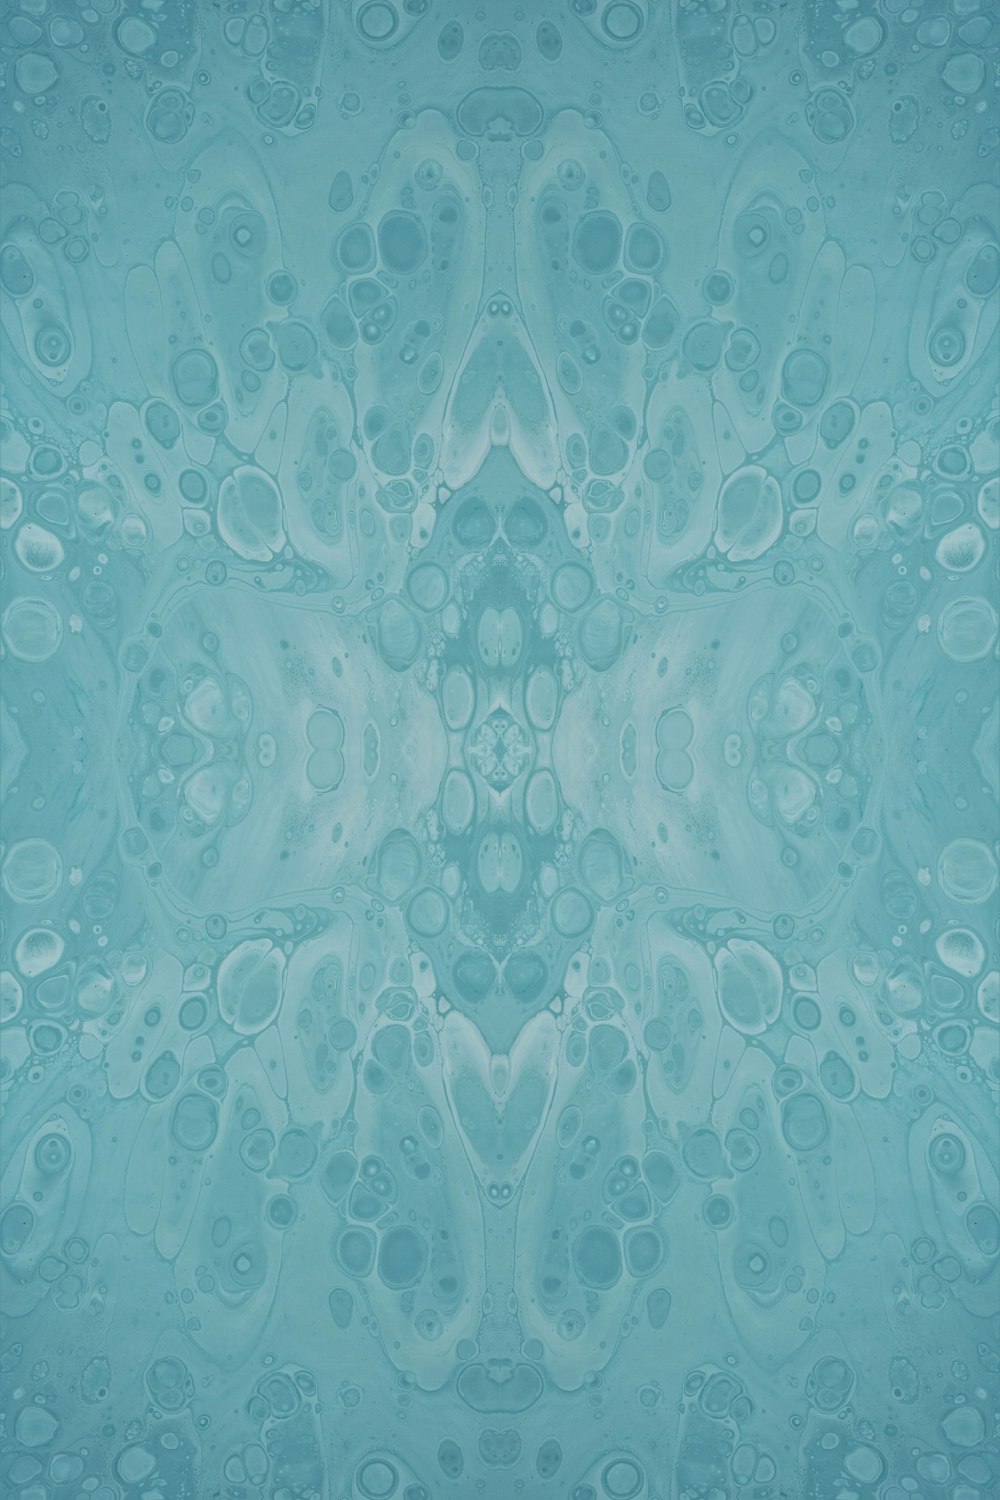 a blue background with a pattern of bubbles